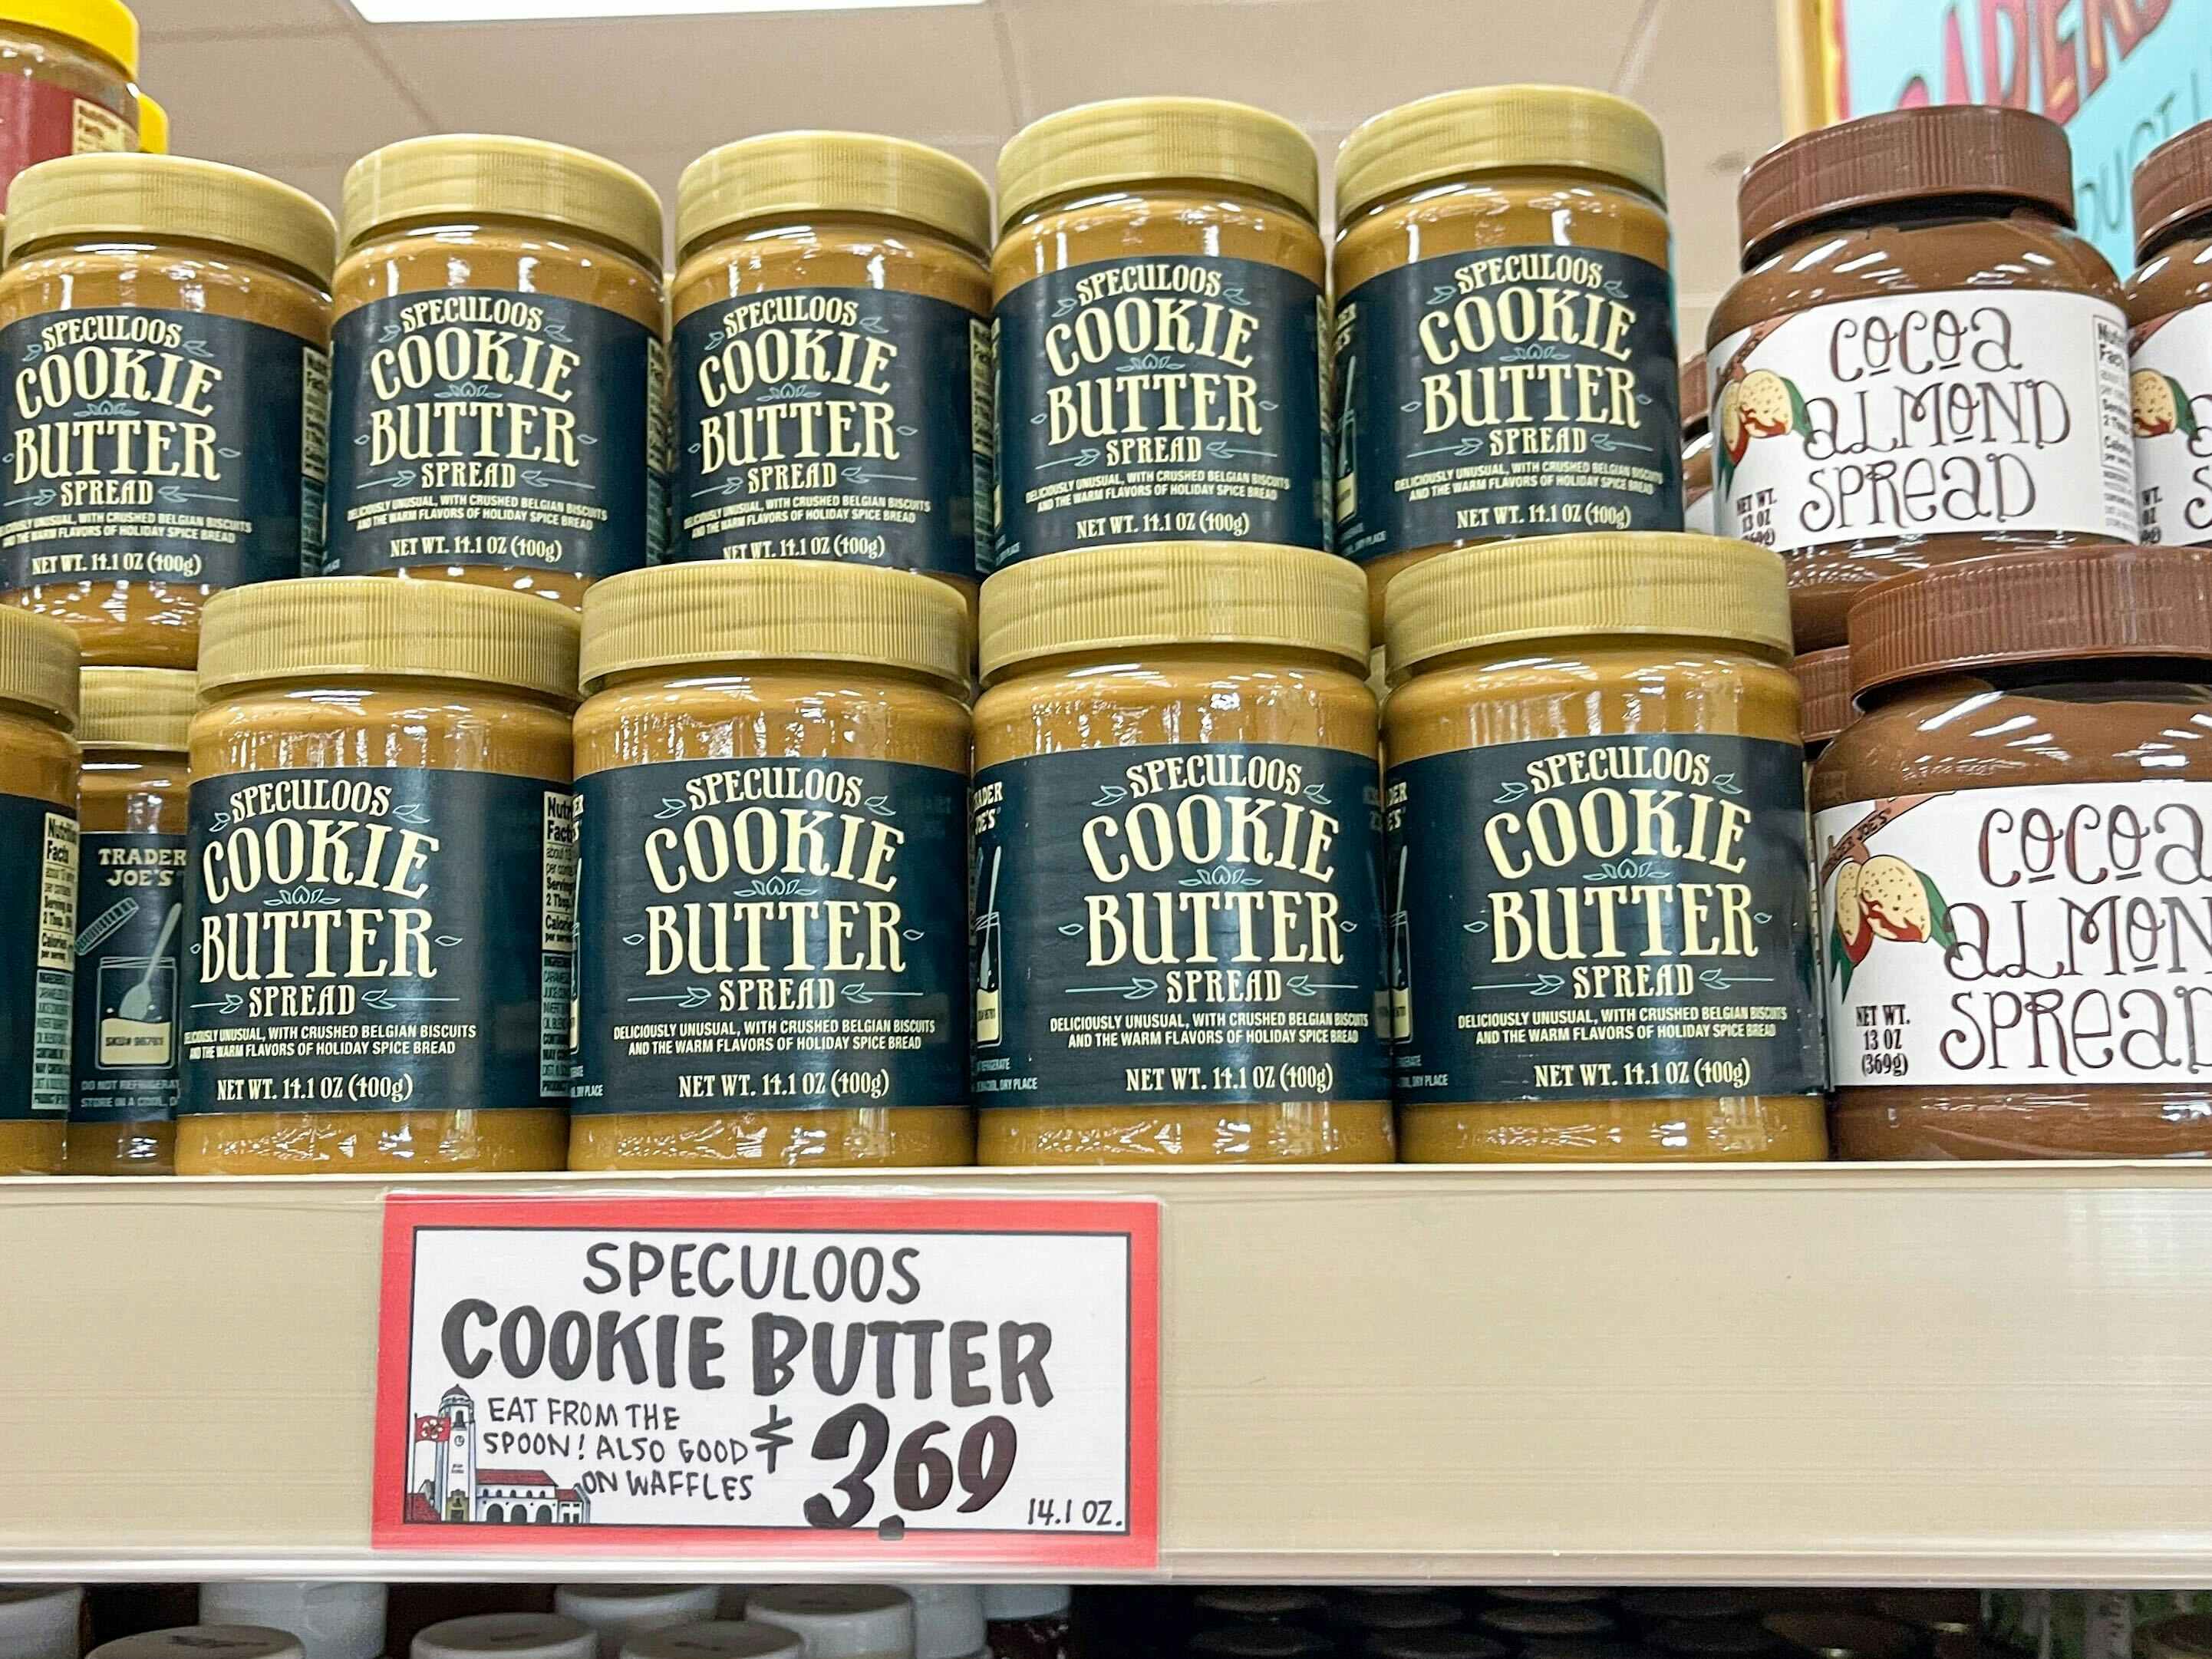 Trader Joe's Speculoos Cookie Butter stocked on a shelf at Trader Joe's.